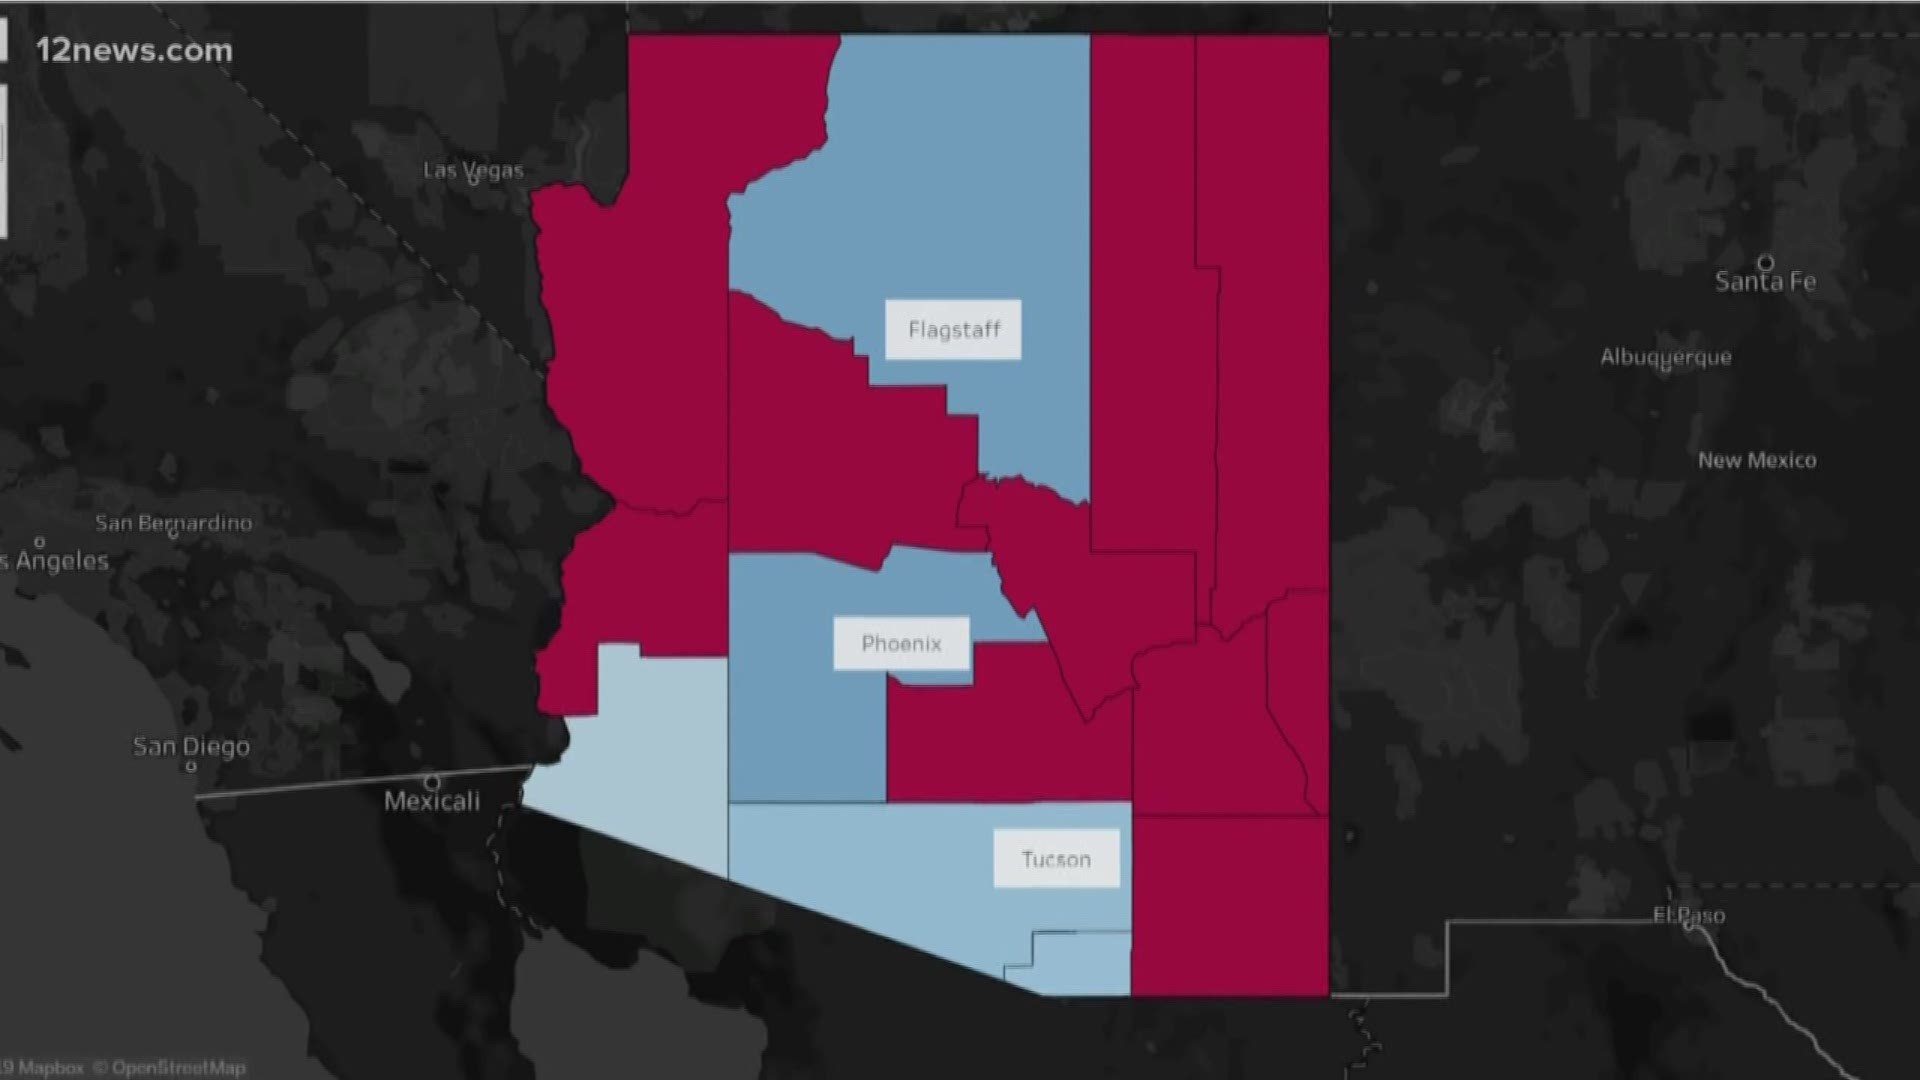 Voting patterns typically give candidates an early idea on how well they'll fare in an election. We look at a voter map of Arizona to examine how the electorate is shifting and making Arizona a battleground state for 2020.